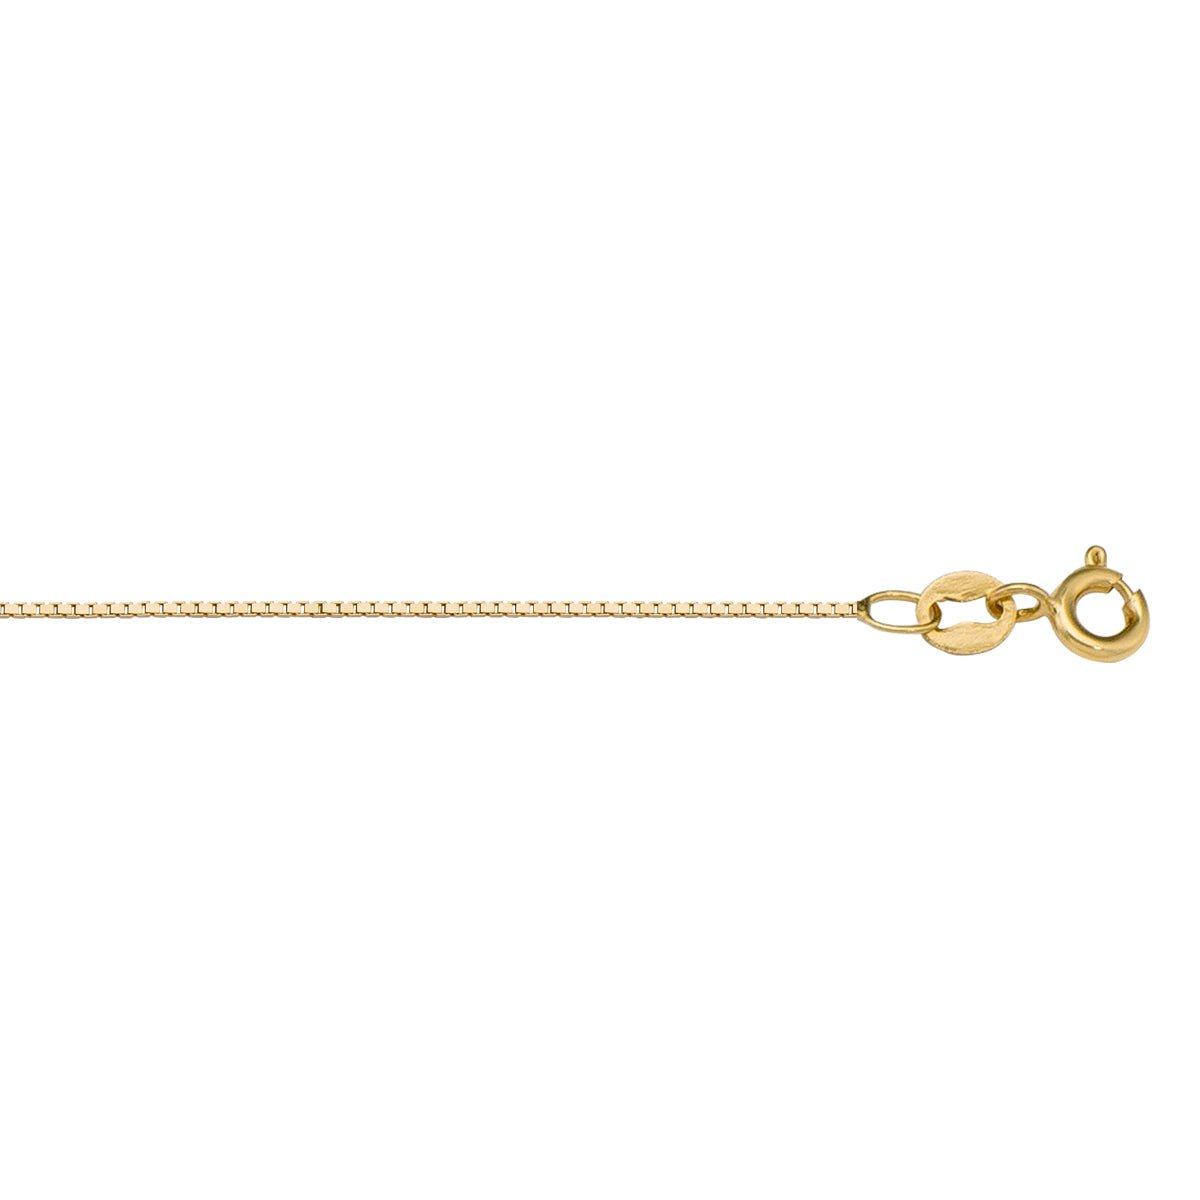 GOLD CHAIN YELLOW GOLD LIGHTLY PLATED SOLID BOX LINK